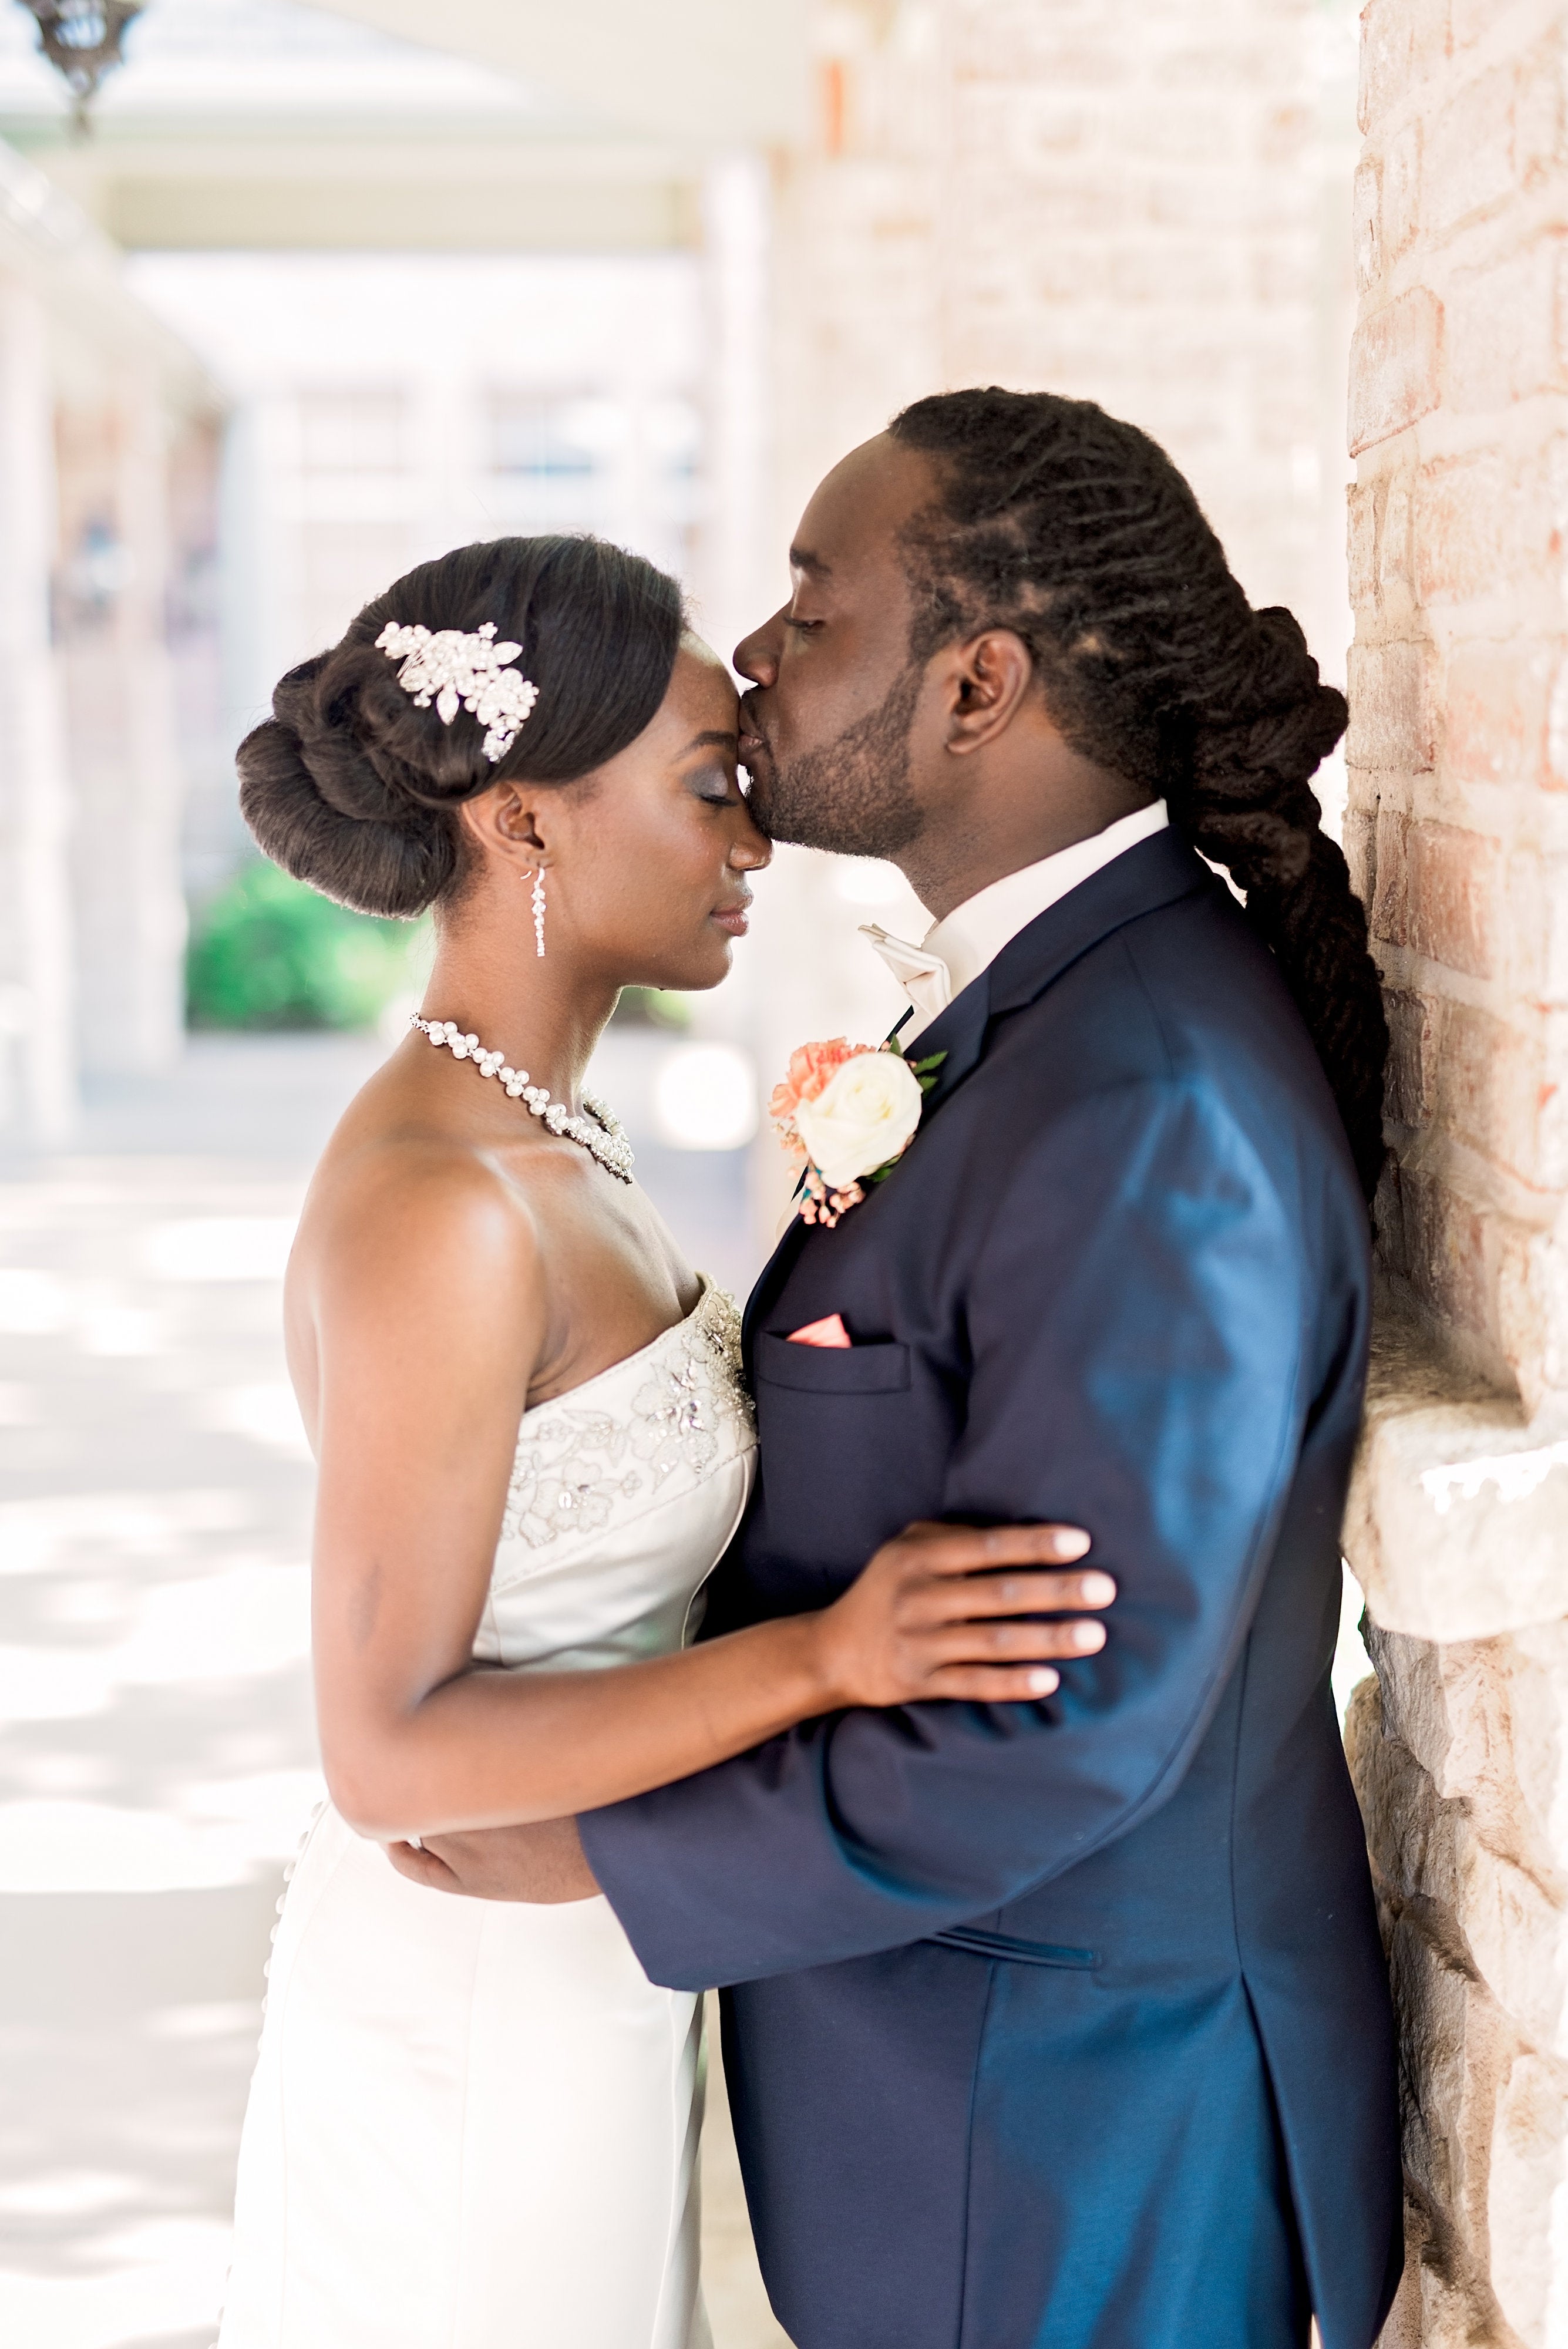 The Most Romantic Forehead Kisses Ever!
